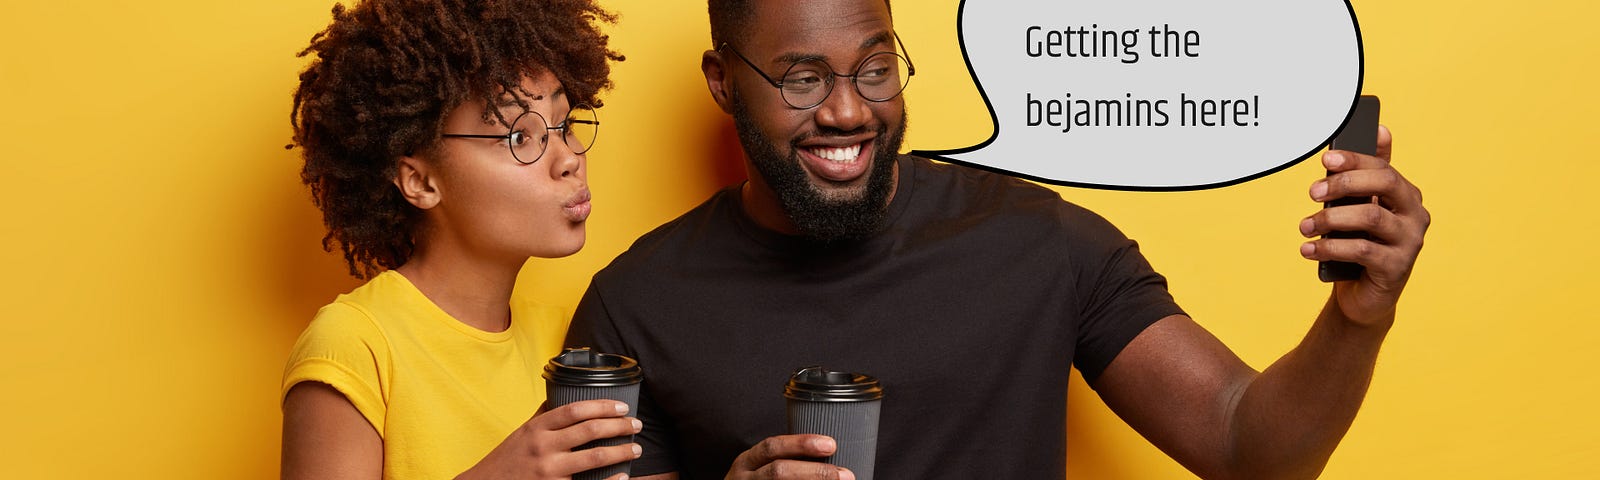 young man and woman holding cups of coffee.